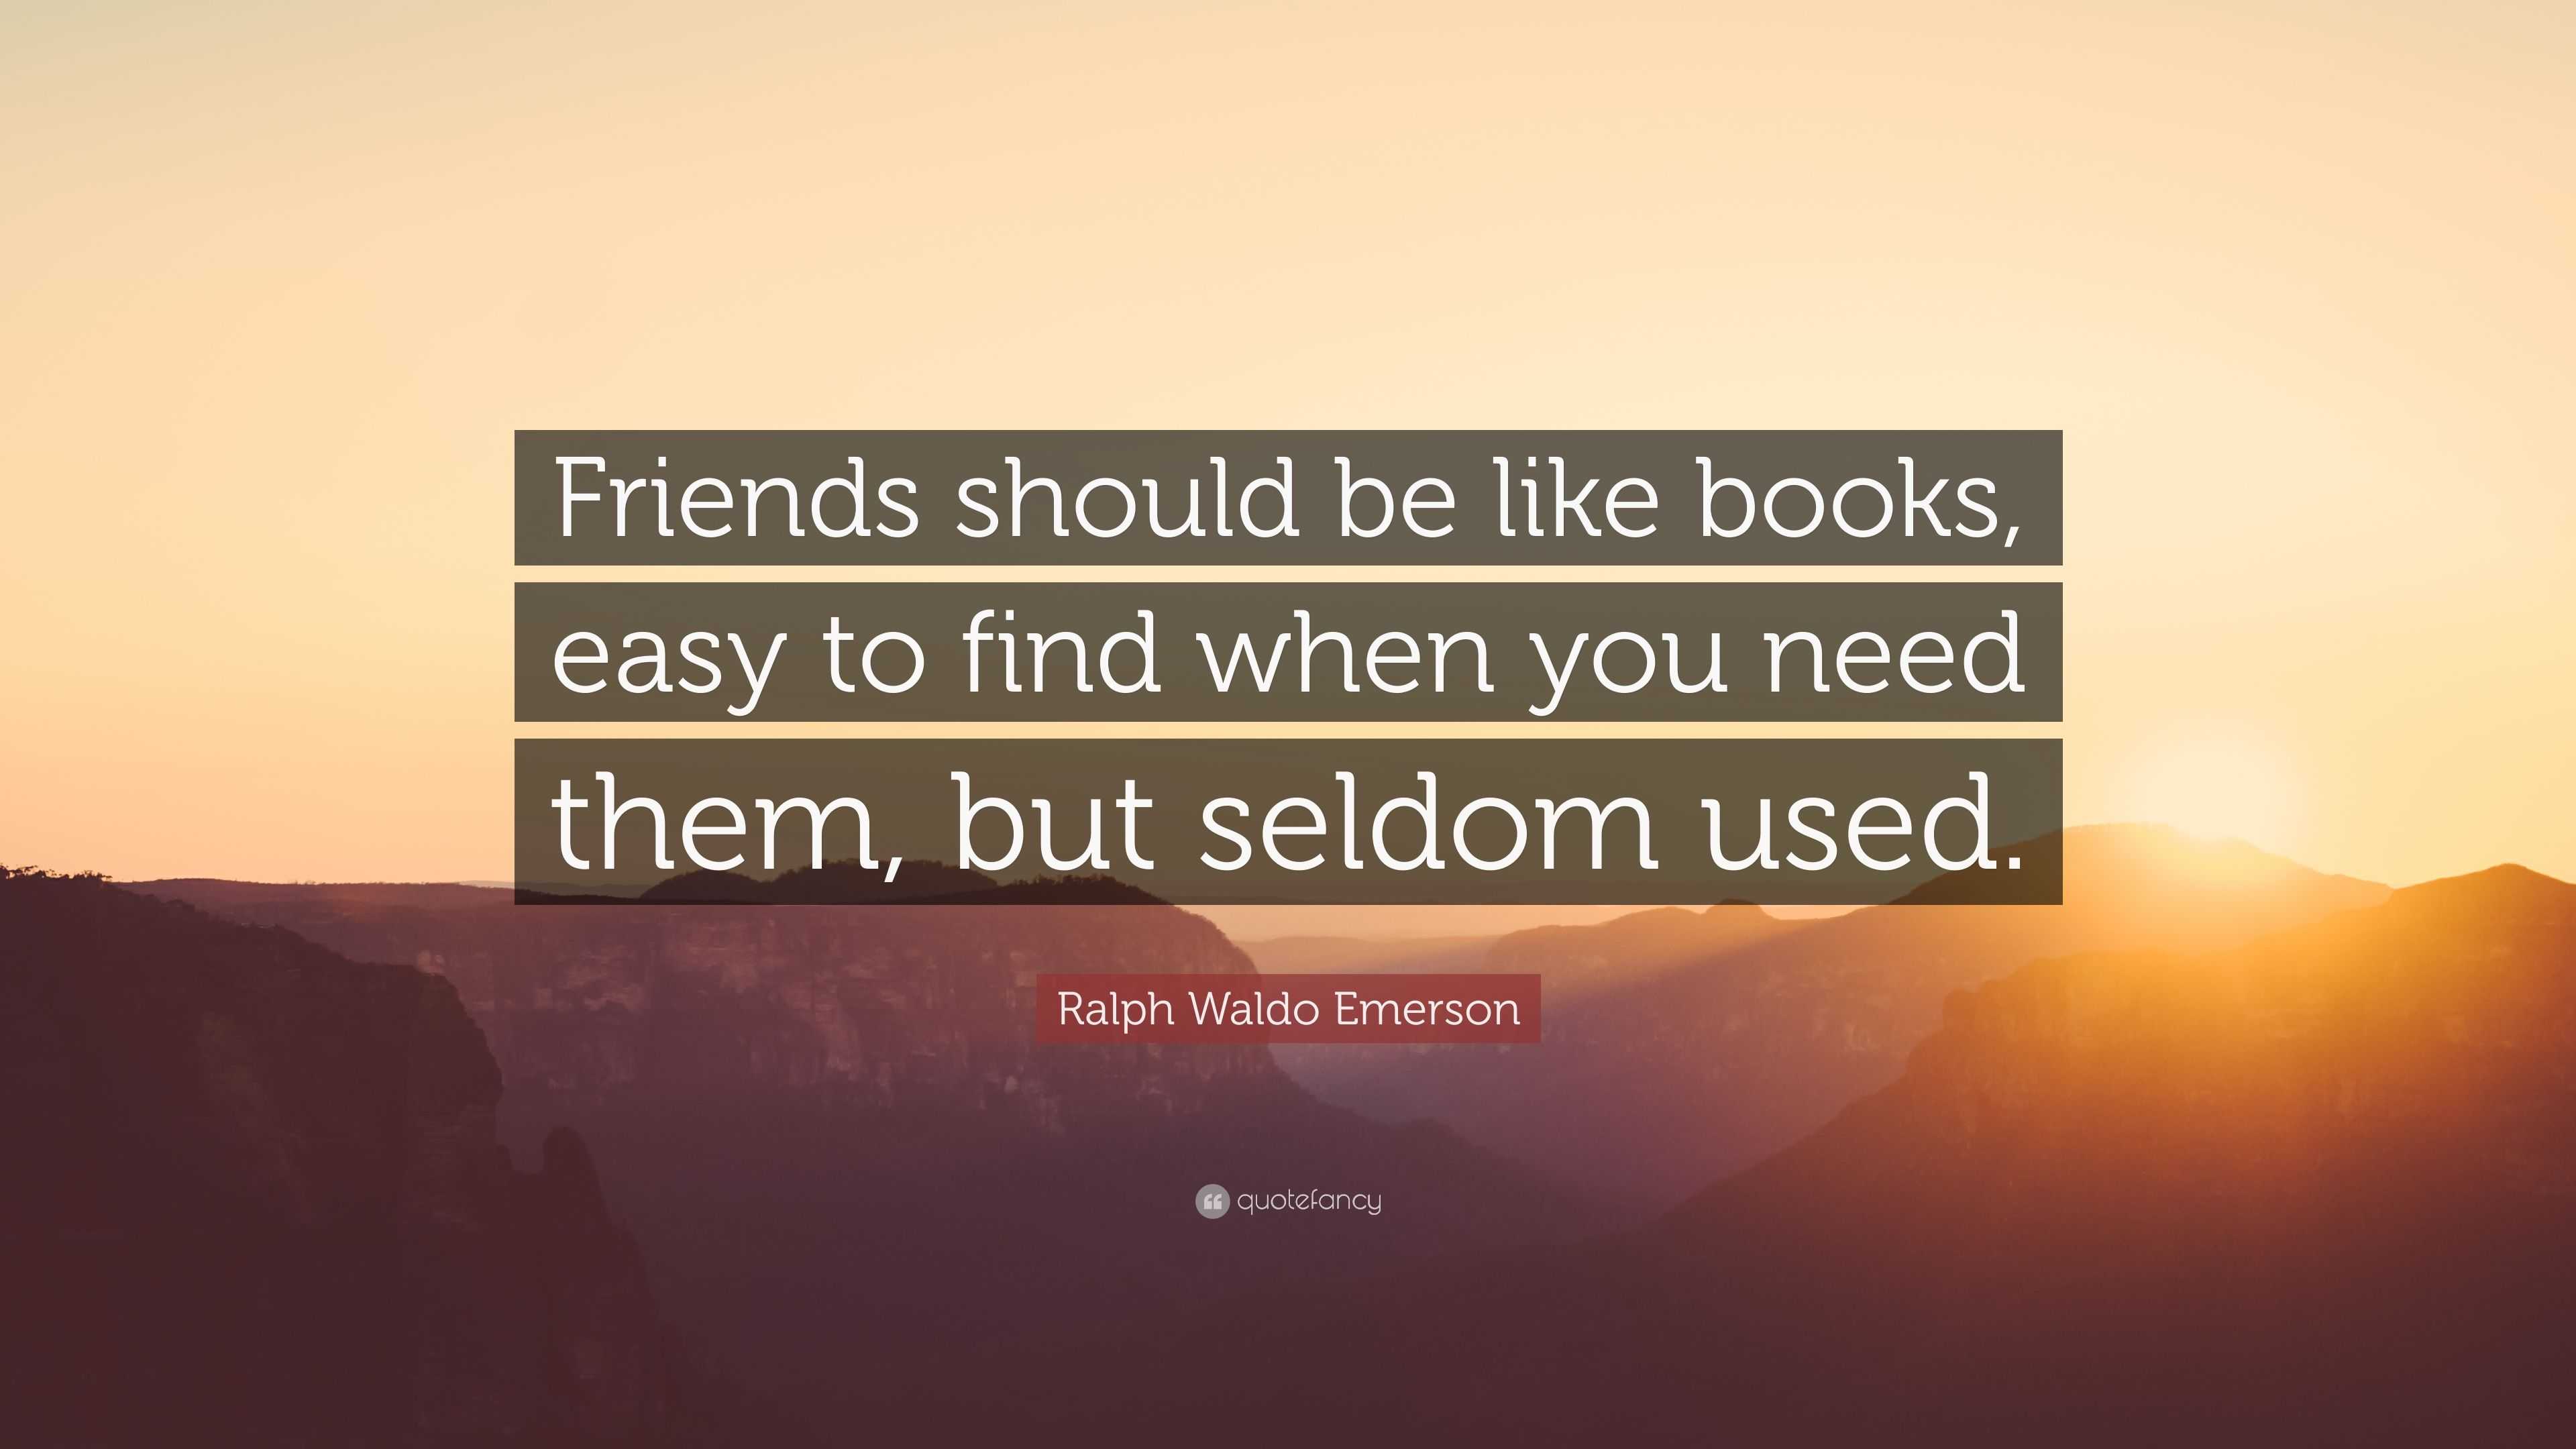 Ralph Waldo Emerson Quote: “Friends should be like books, easy to find